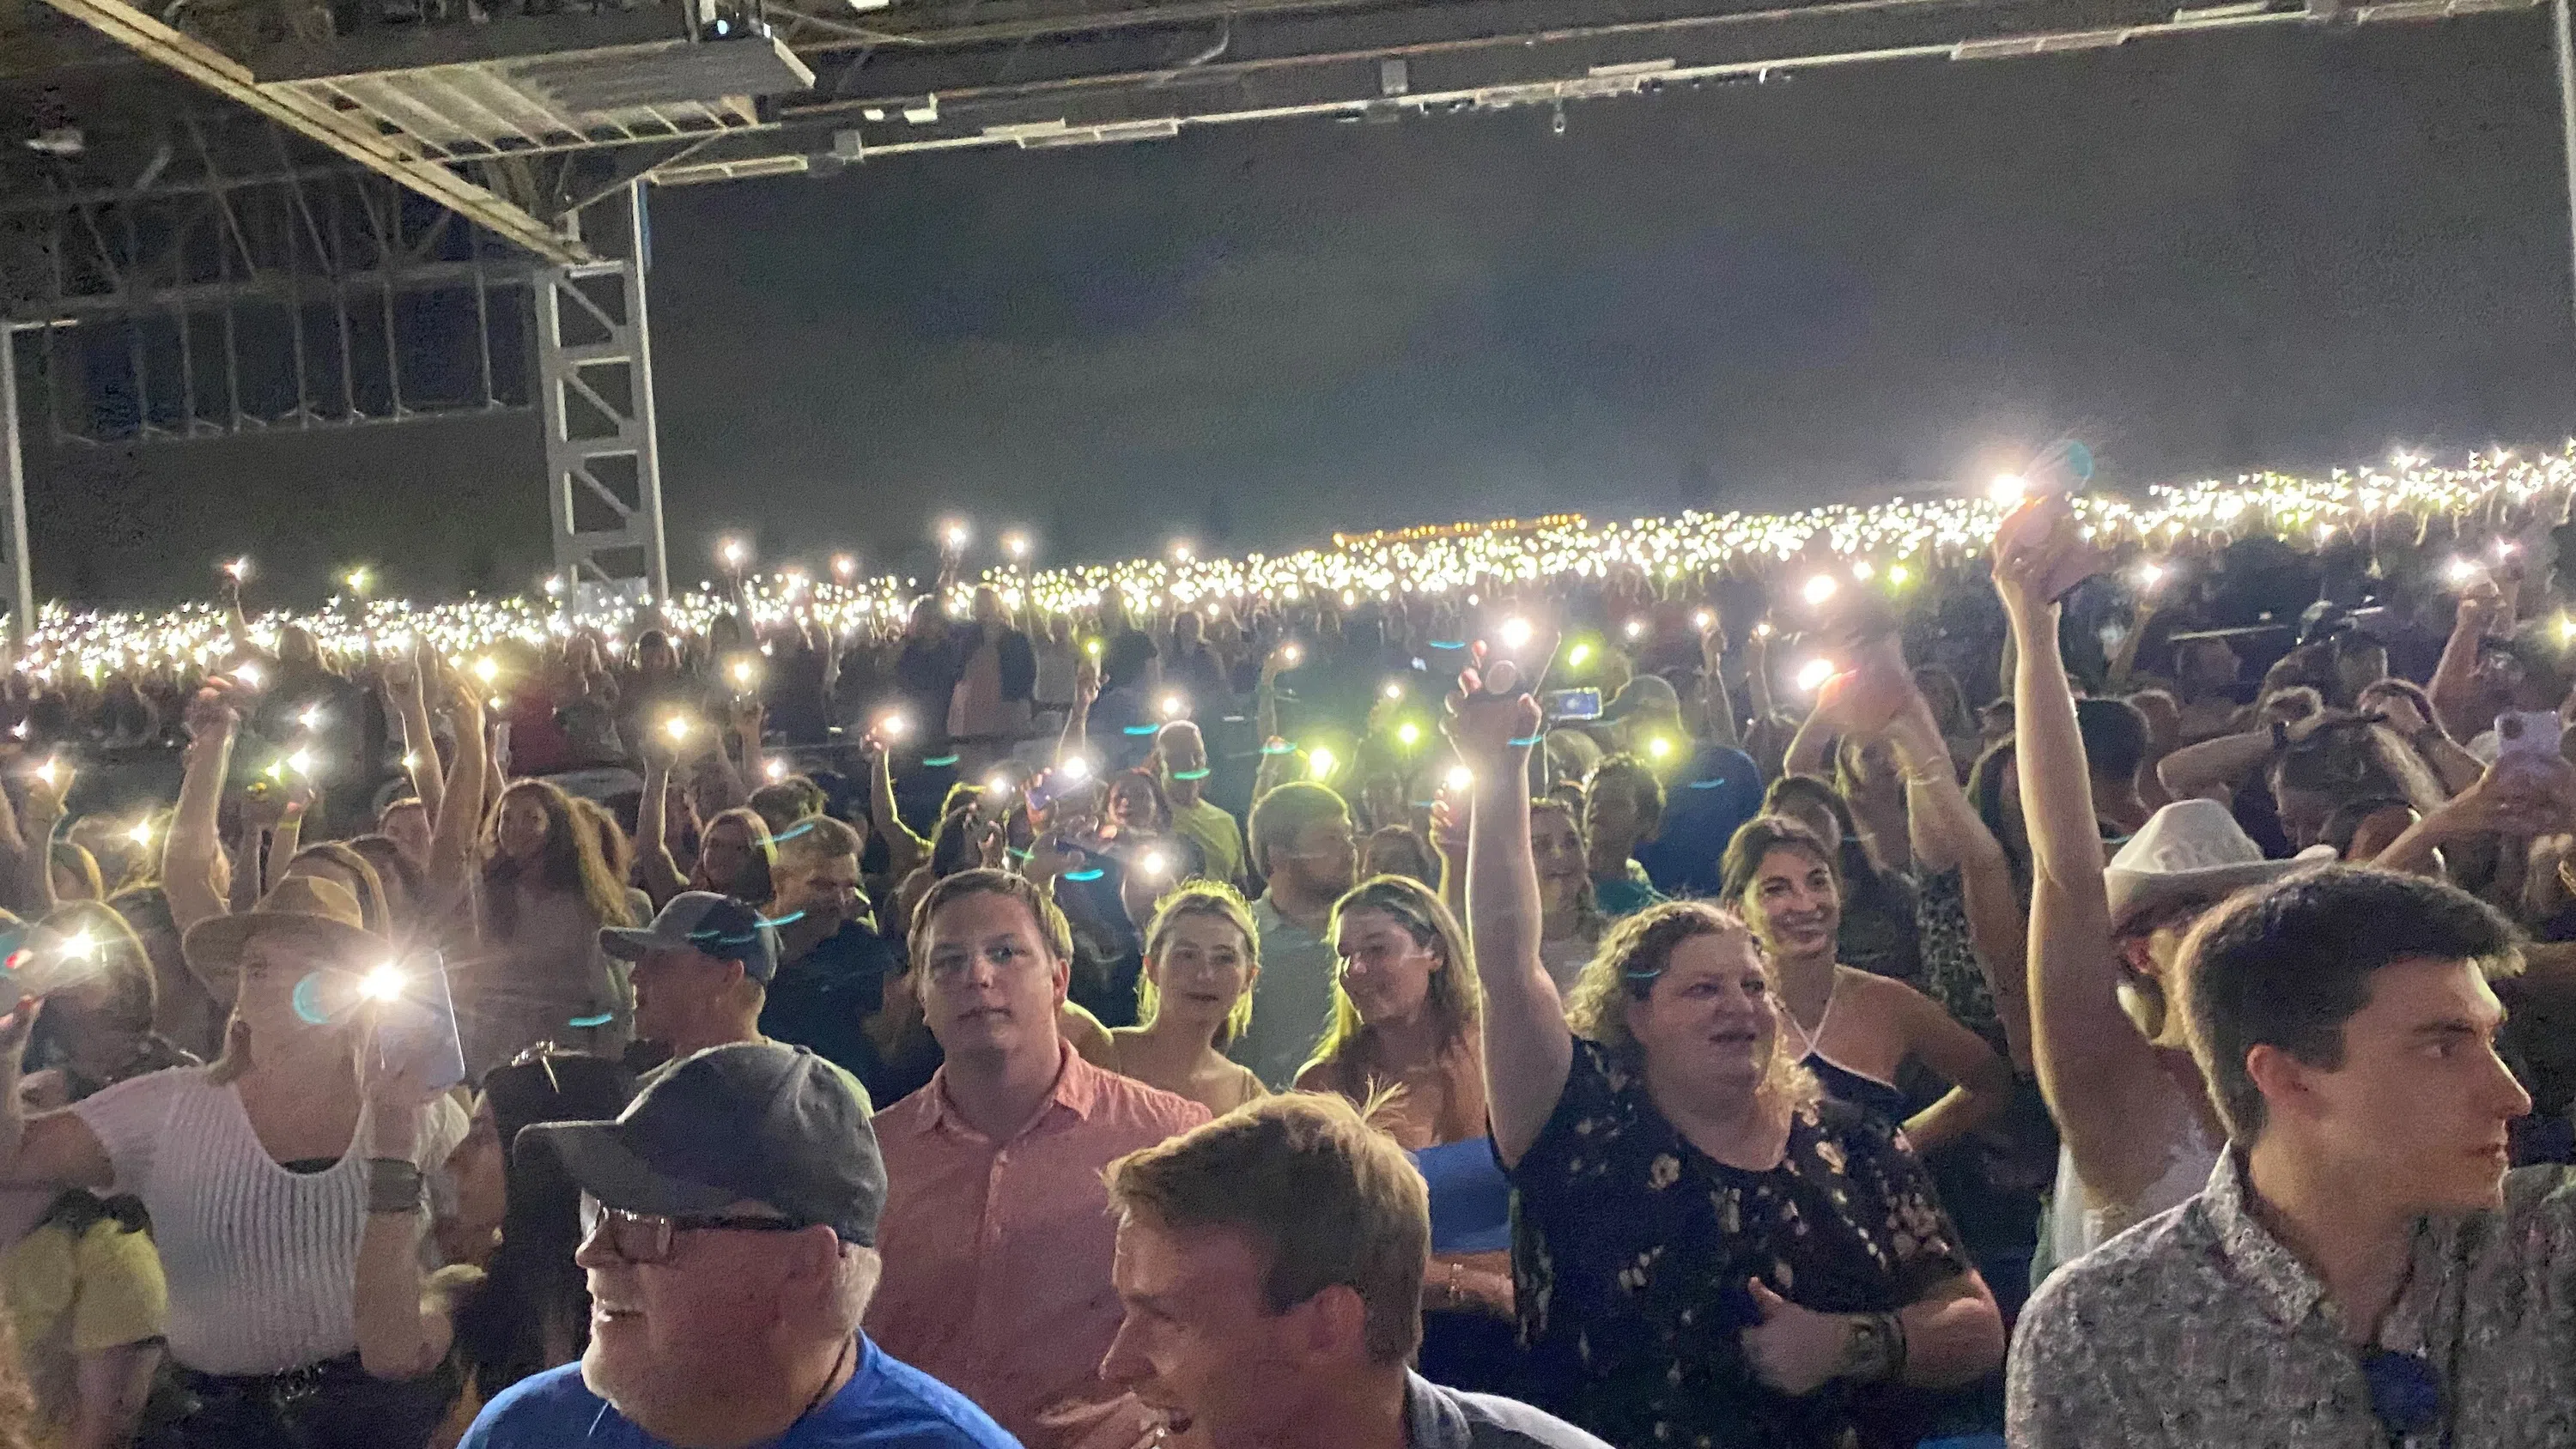 The crowd holds up their phones during a song